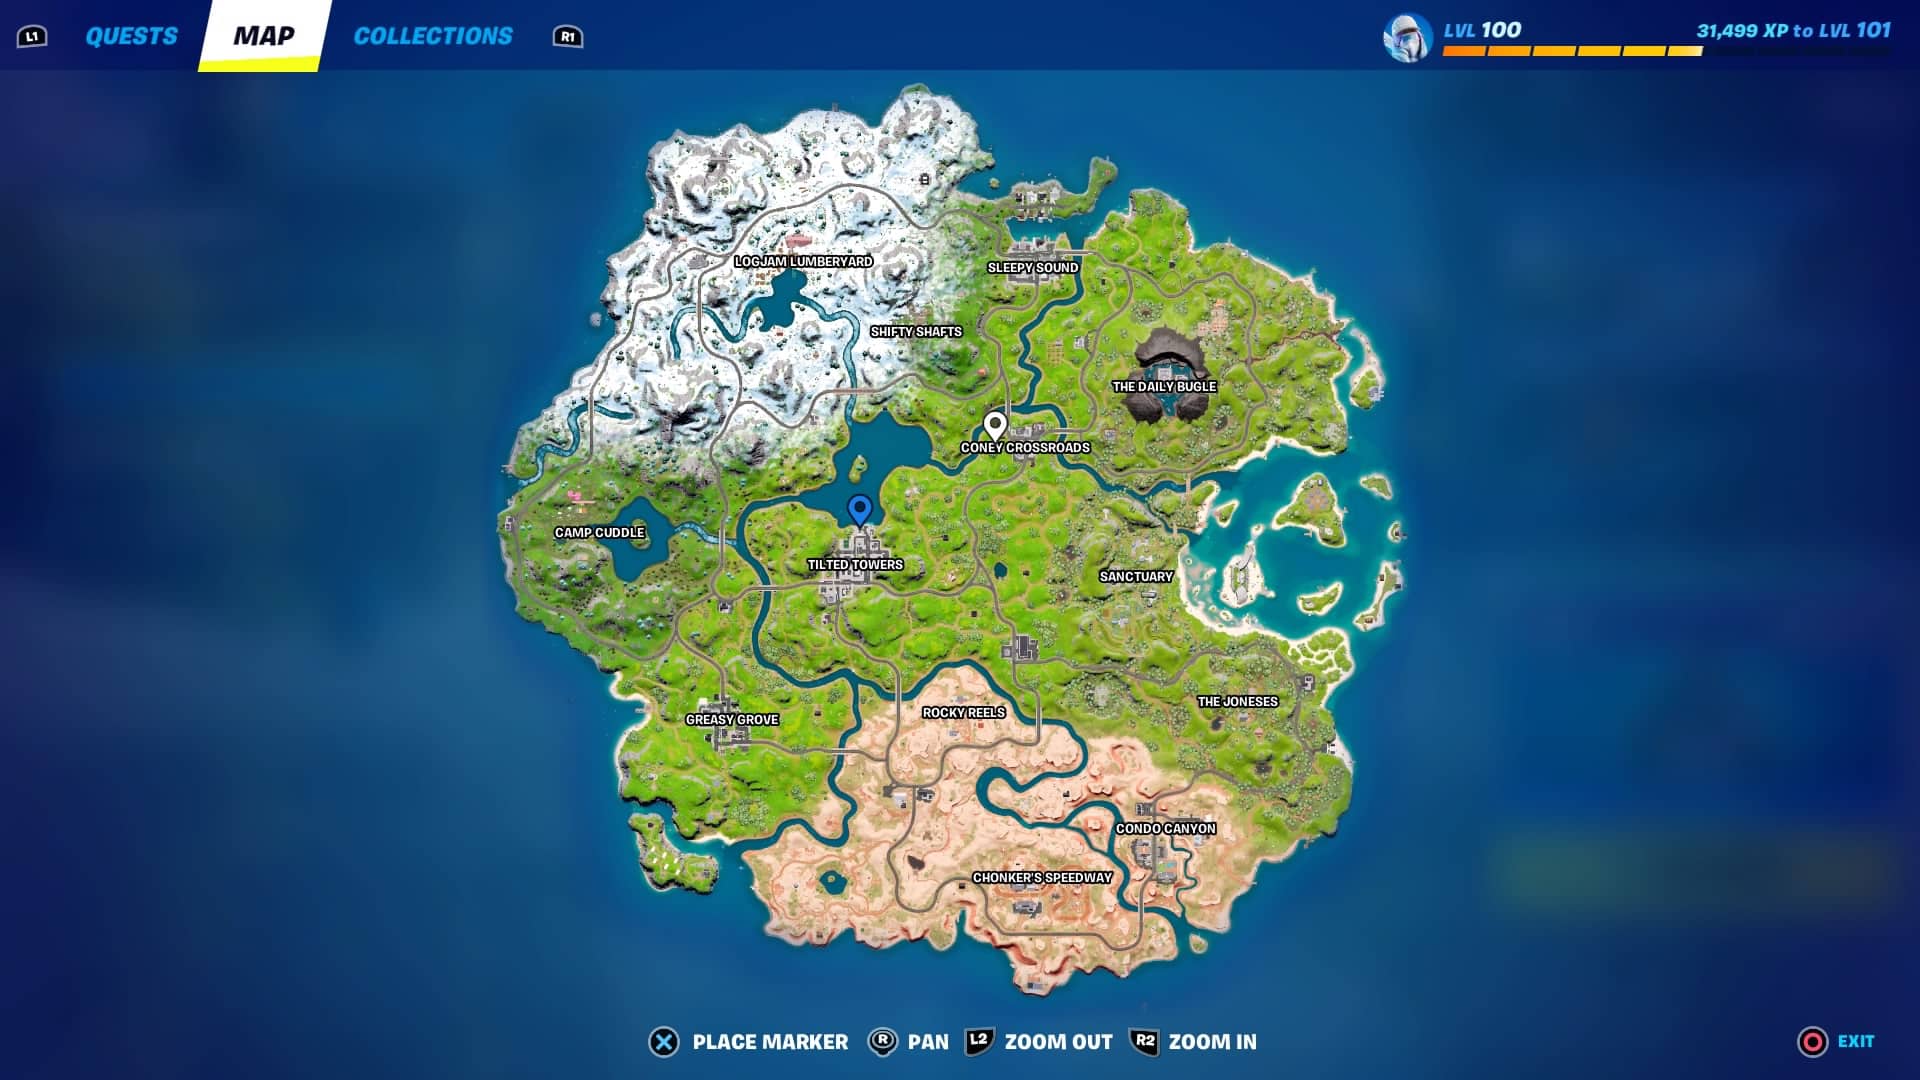 Tilted Towers fully revealed on Chapter 3 Map